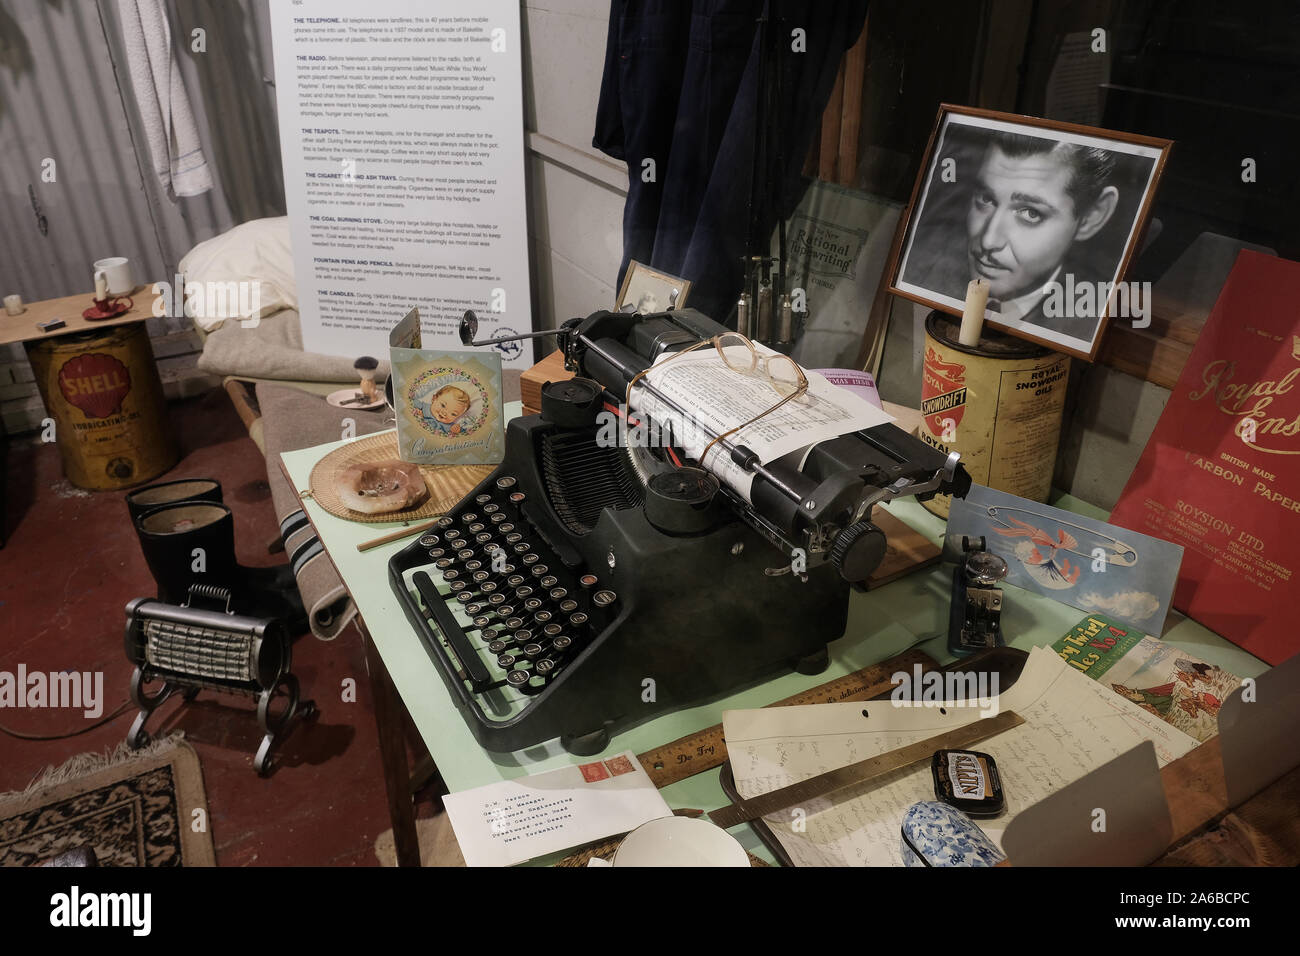 Equipment display as might have been in use in a small engineering office in the second world war. Stock Photo